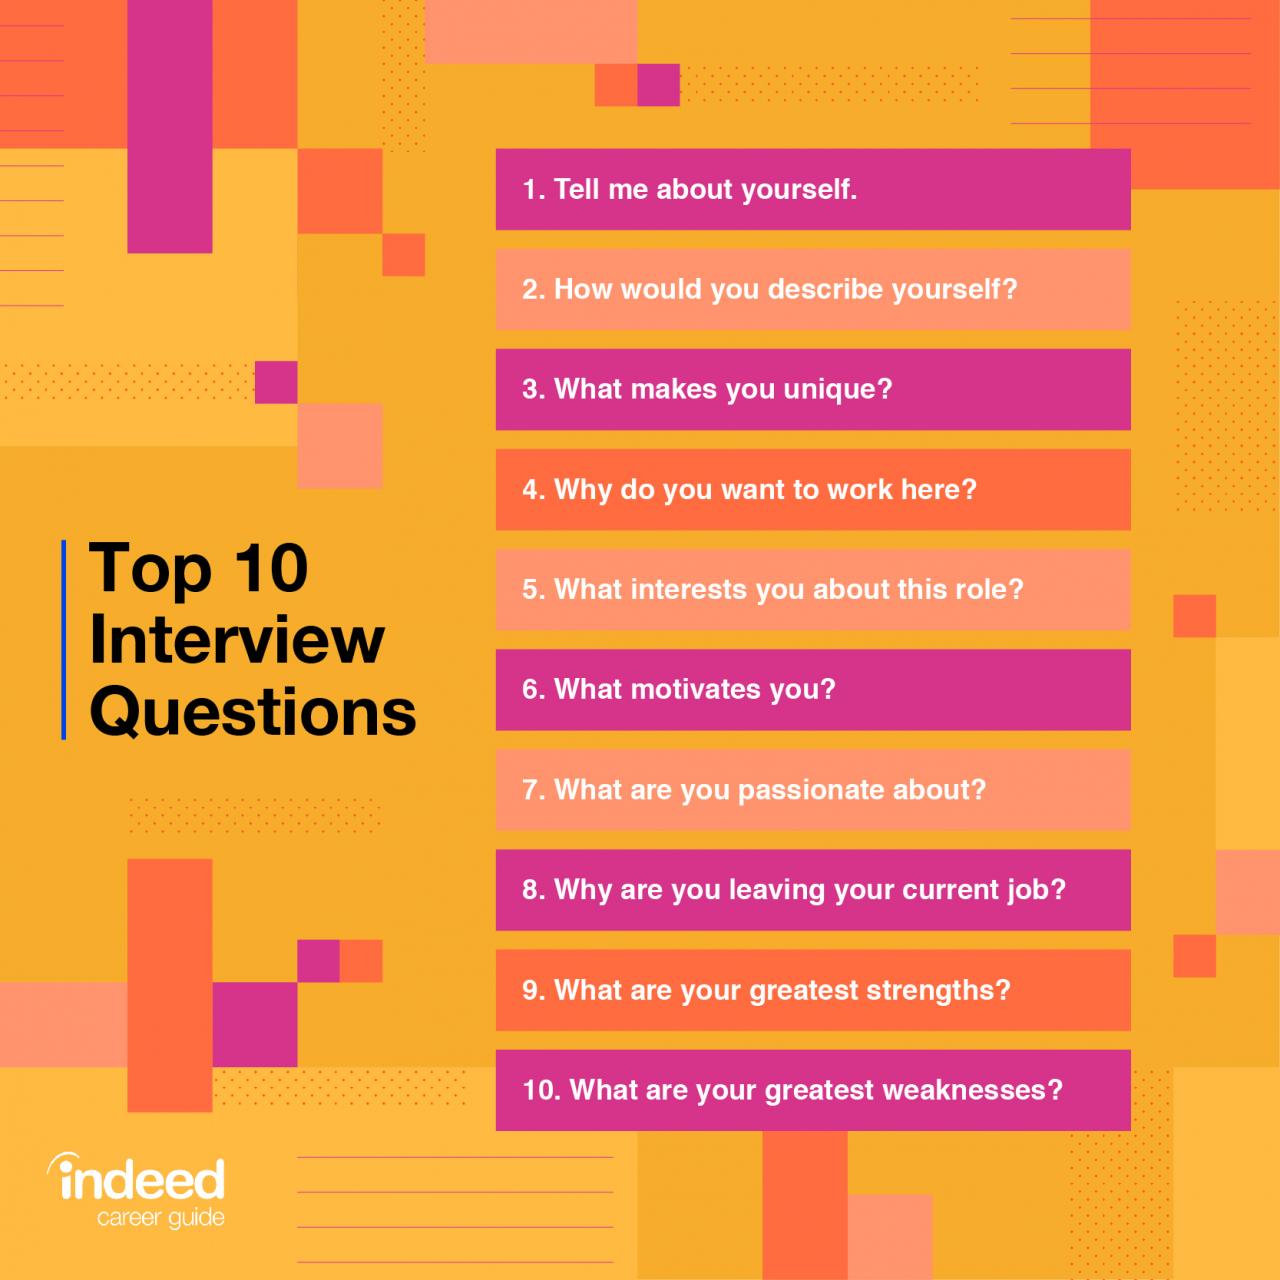 Common questions to be asked in an interview